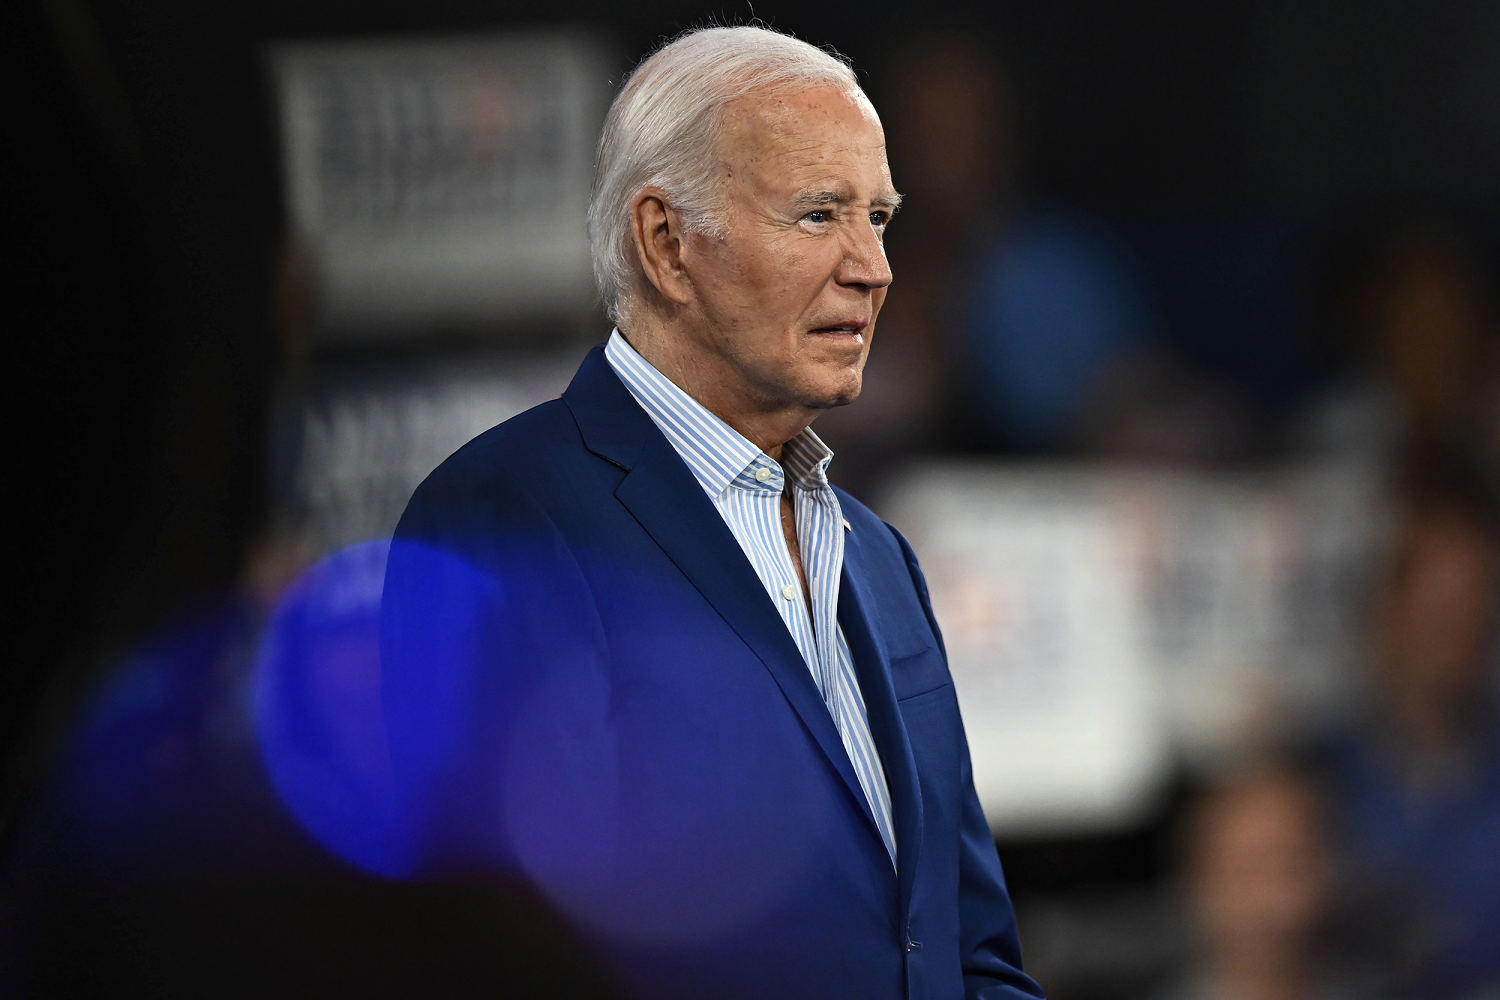 Biden says he saw a doctor after the debate, but admits 'I screwed up'